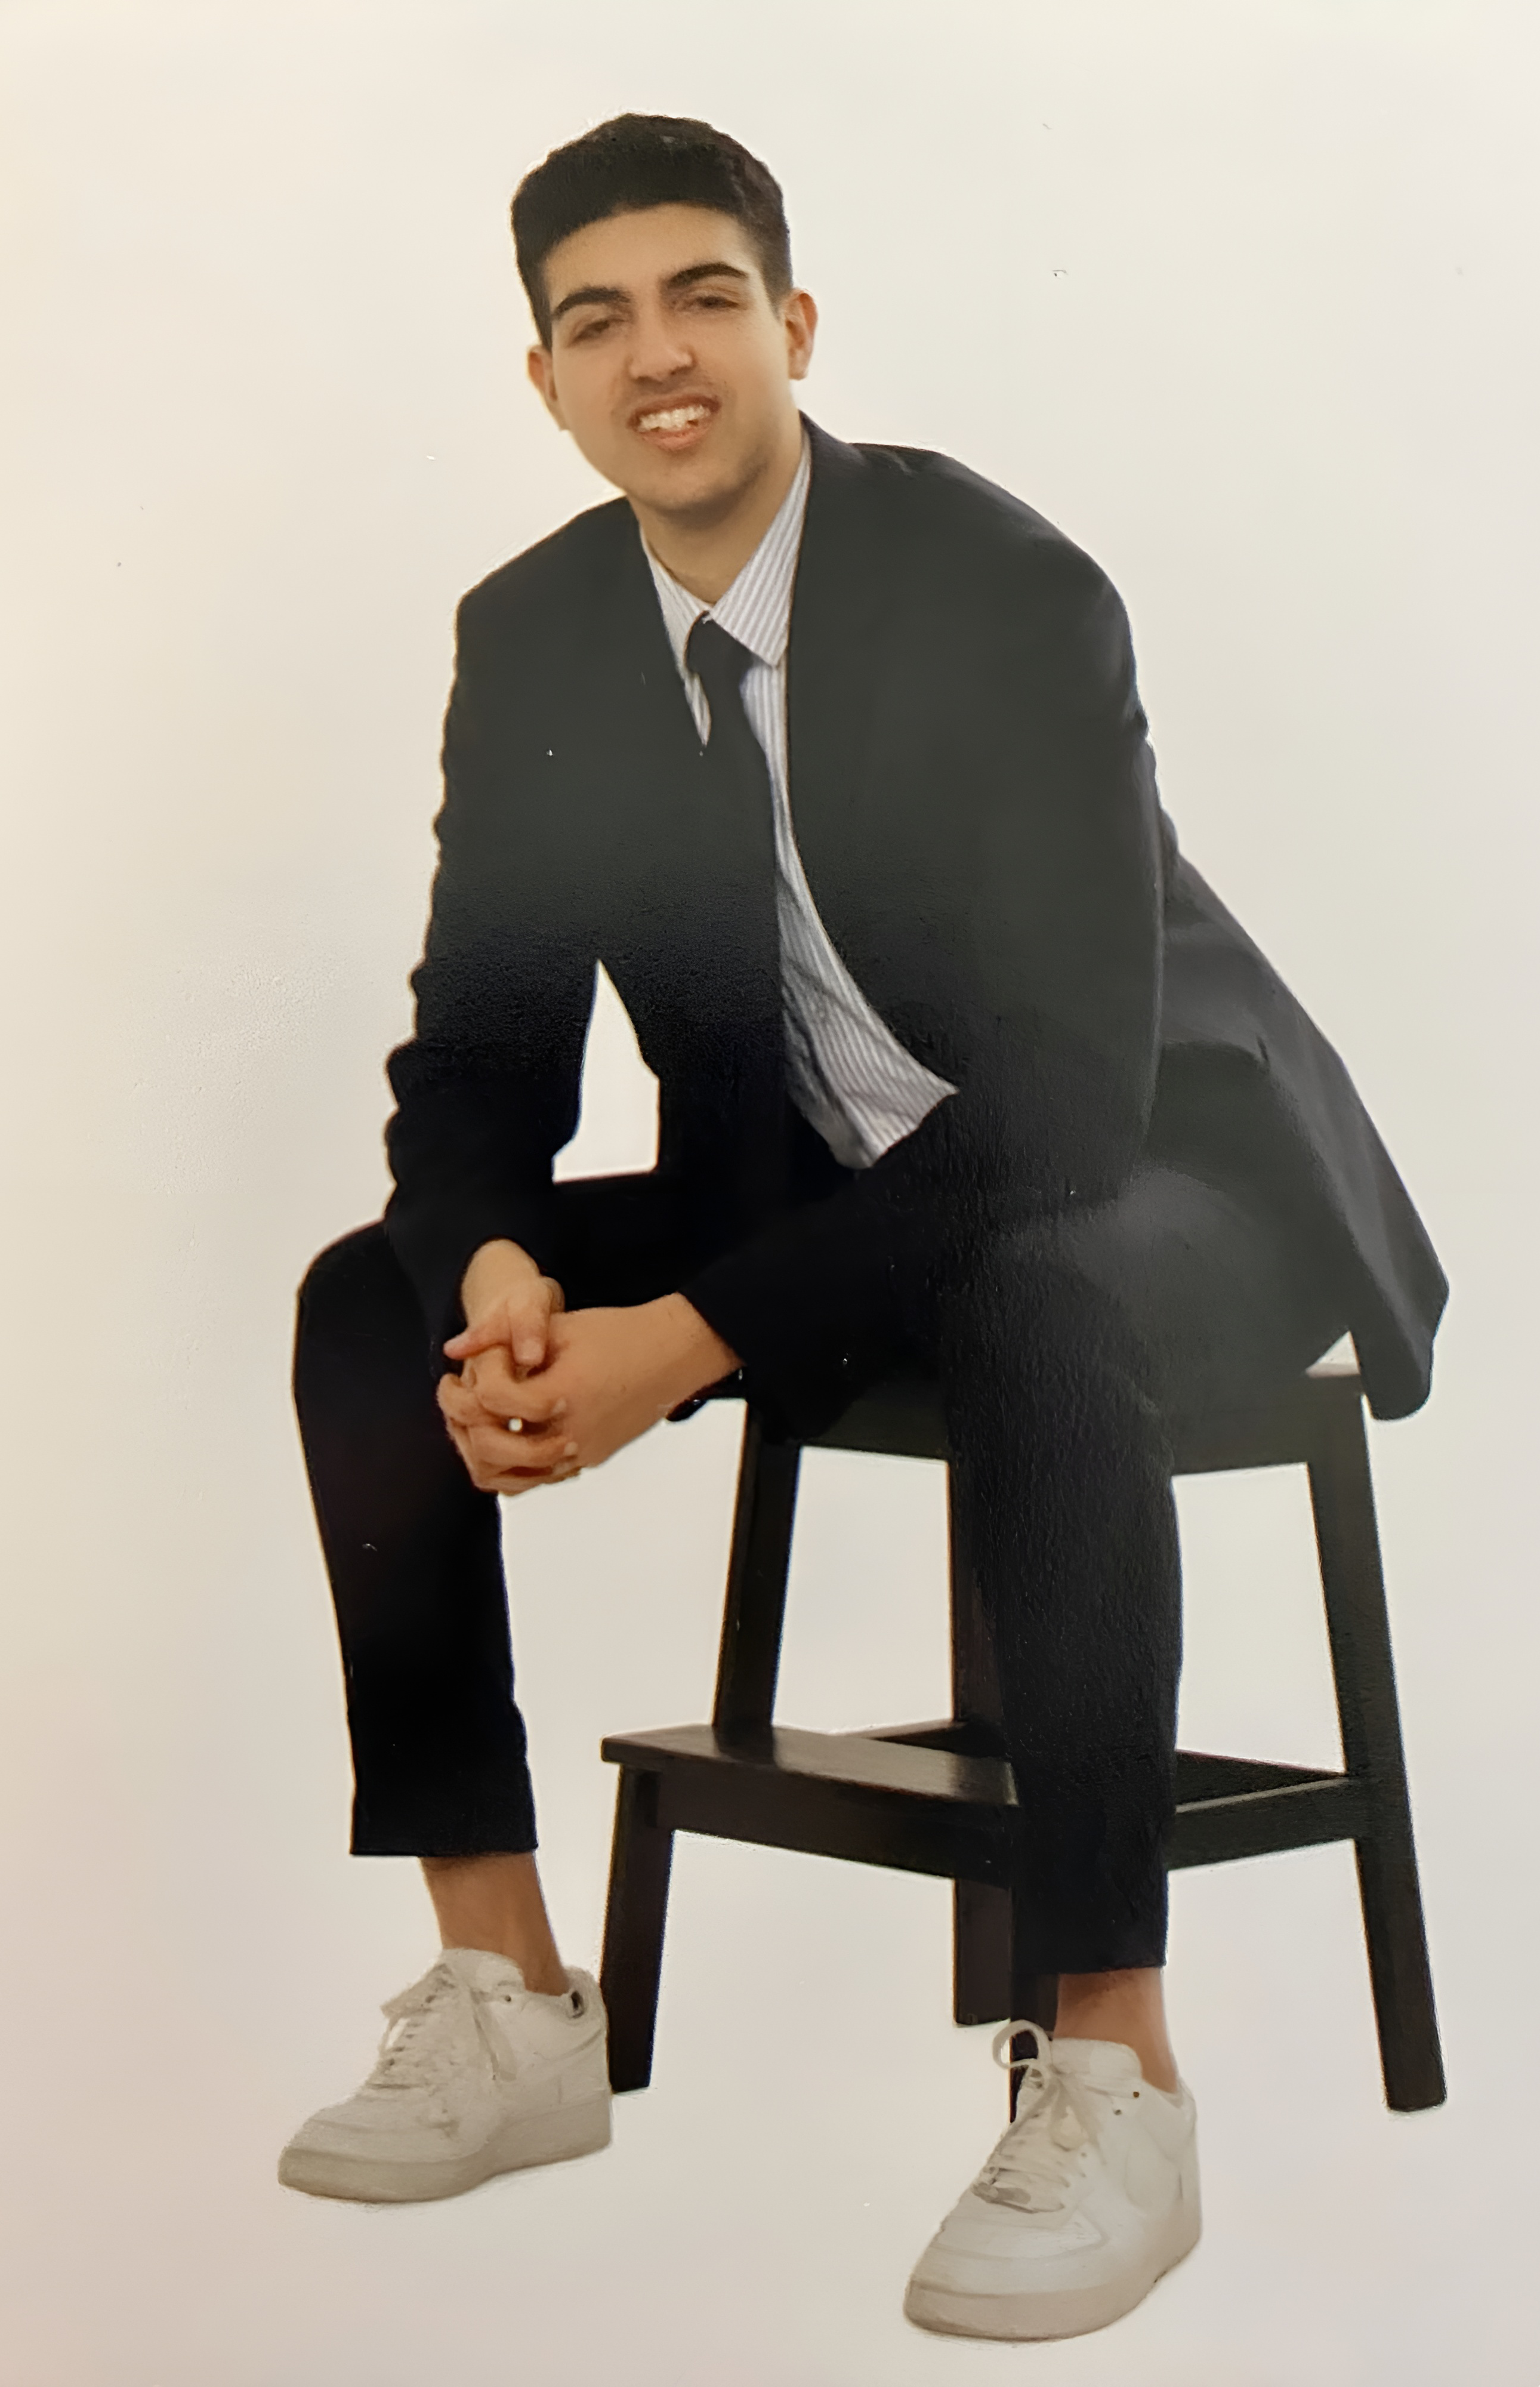 A professional photo of Aidan. He is wearing a black suit and tie with a pair of white sneakers and sits on a stool with his hands clasped in his lap.